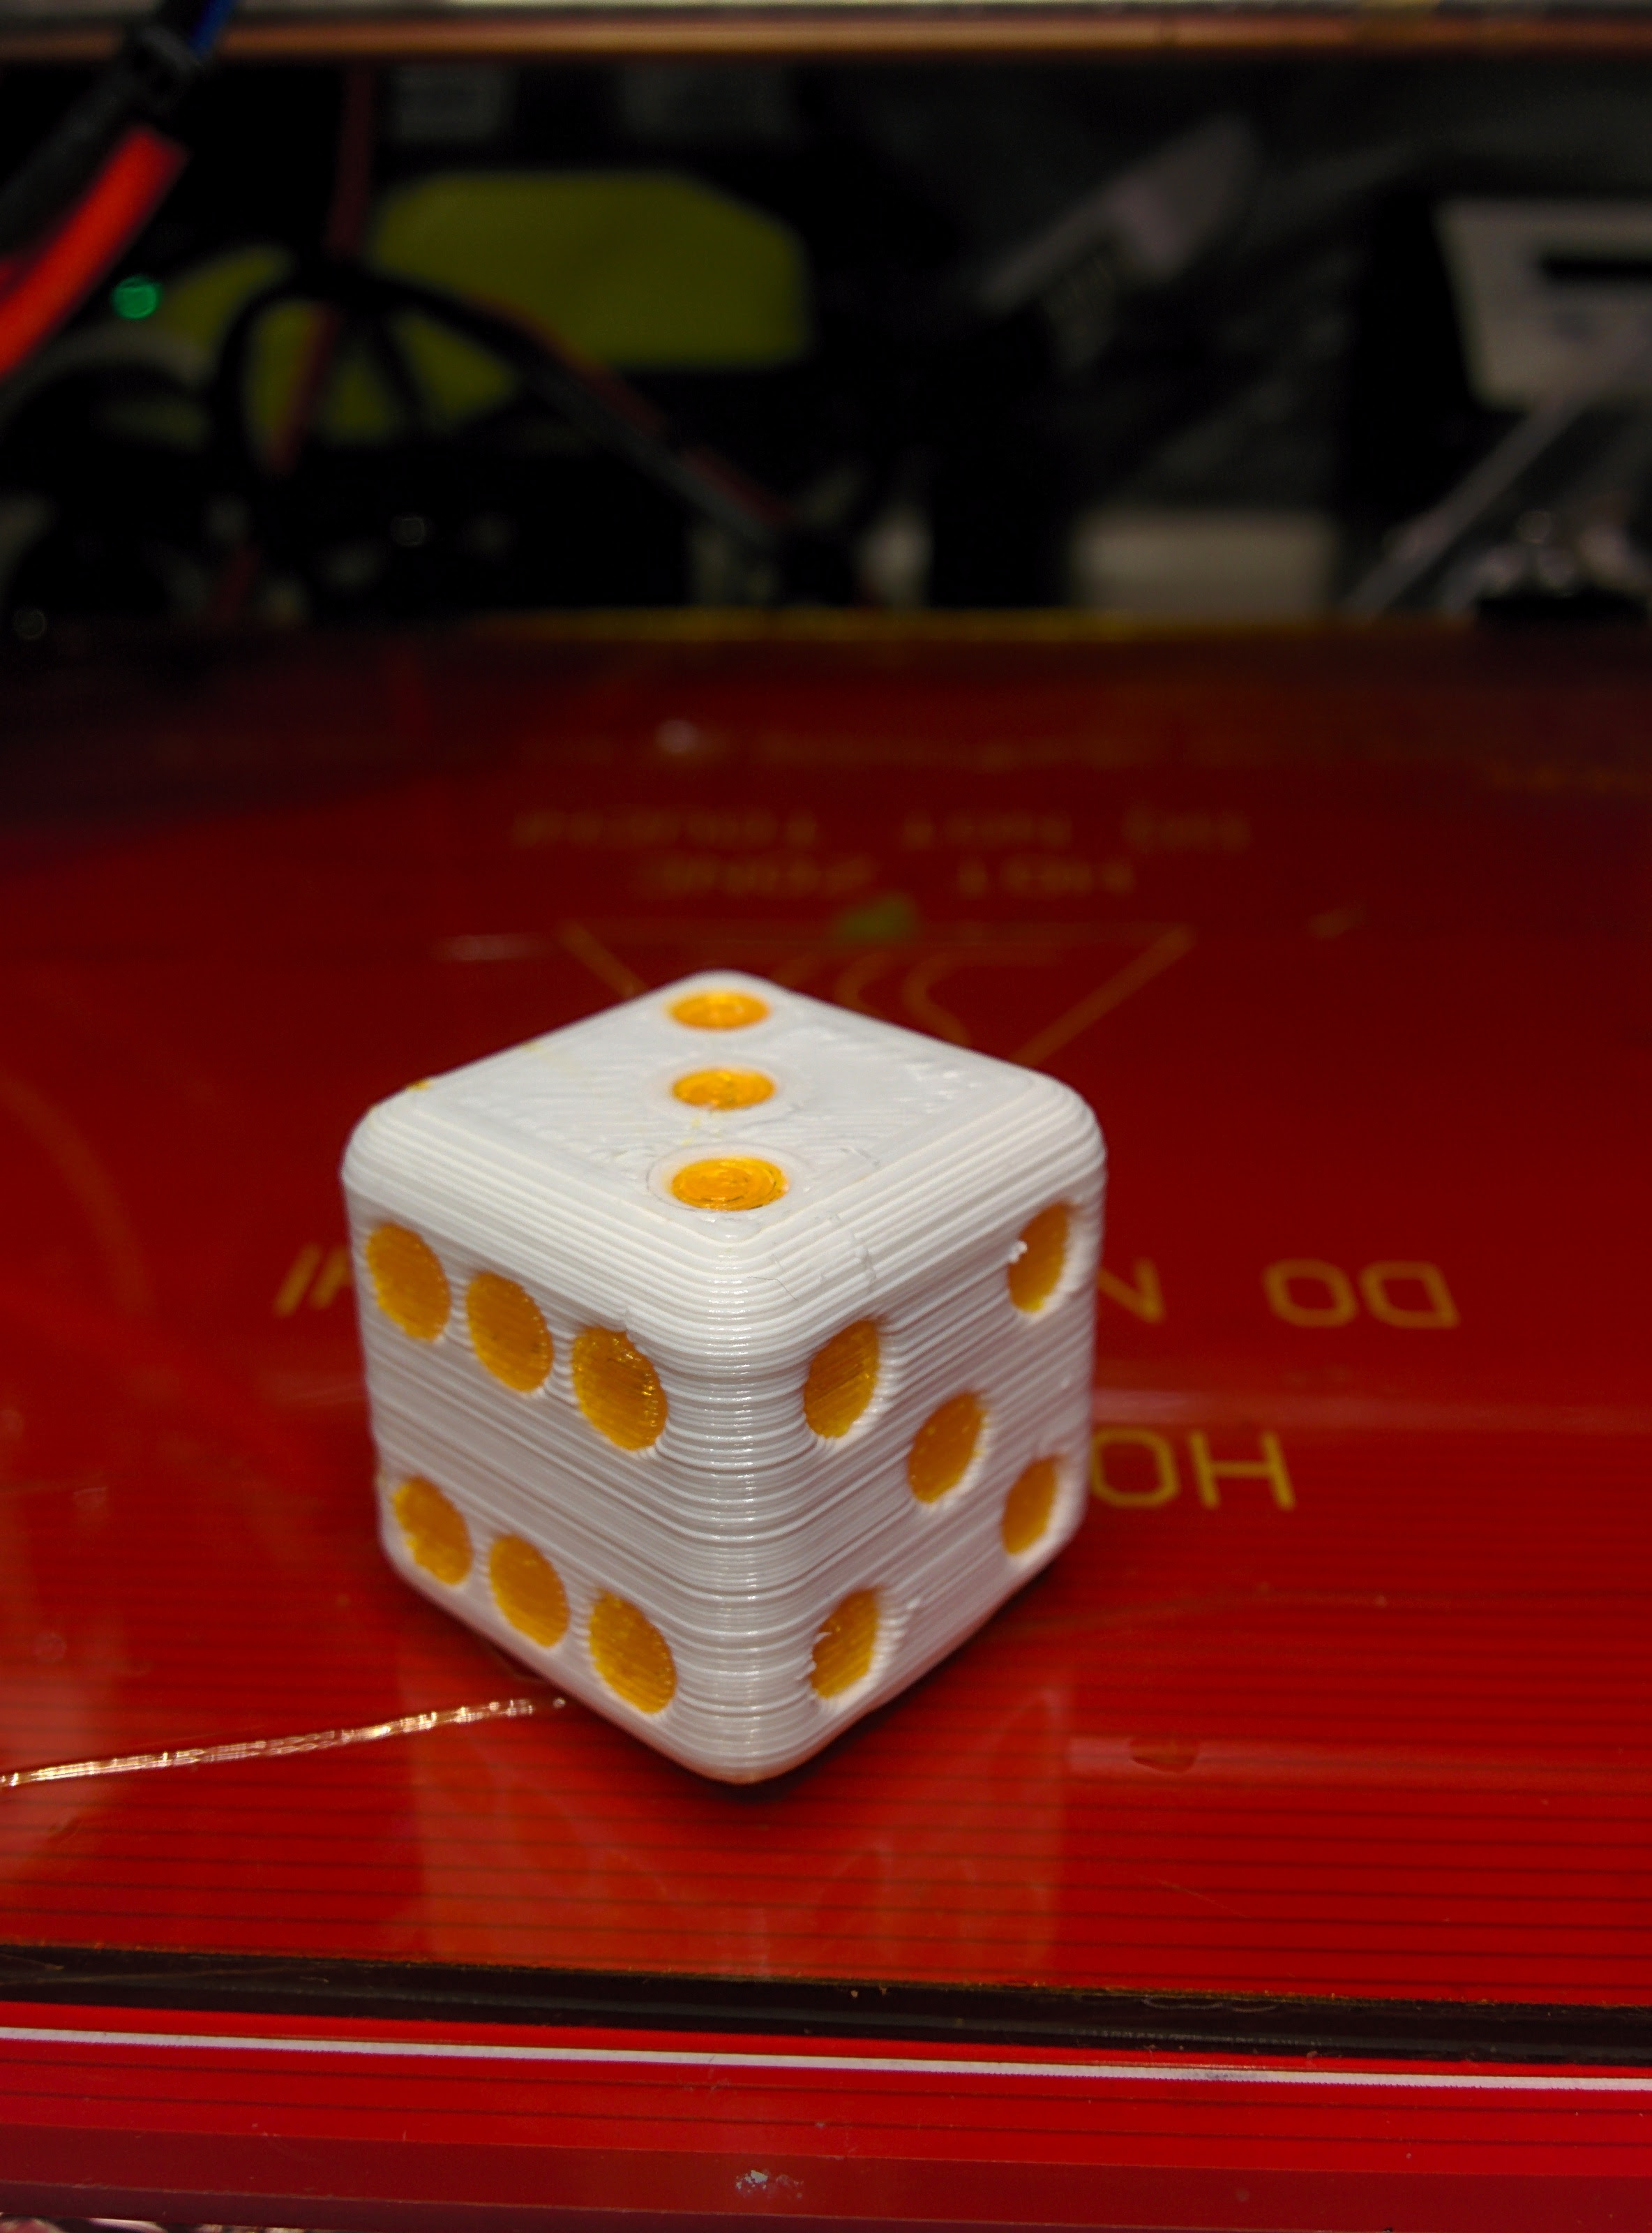 Laserphile Hydra 3D printed dice with multiple materials